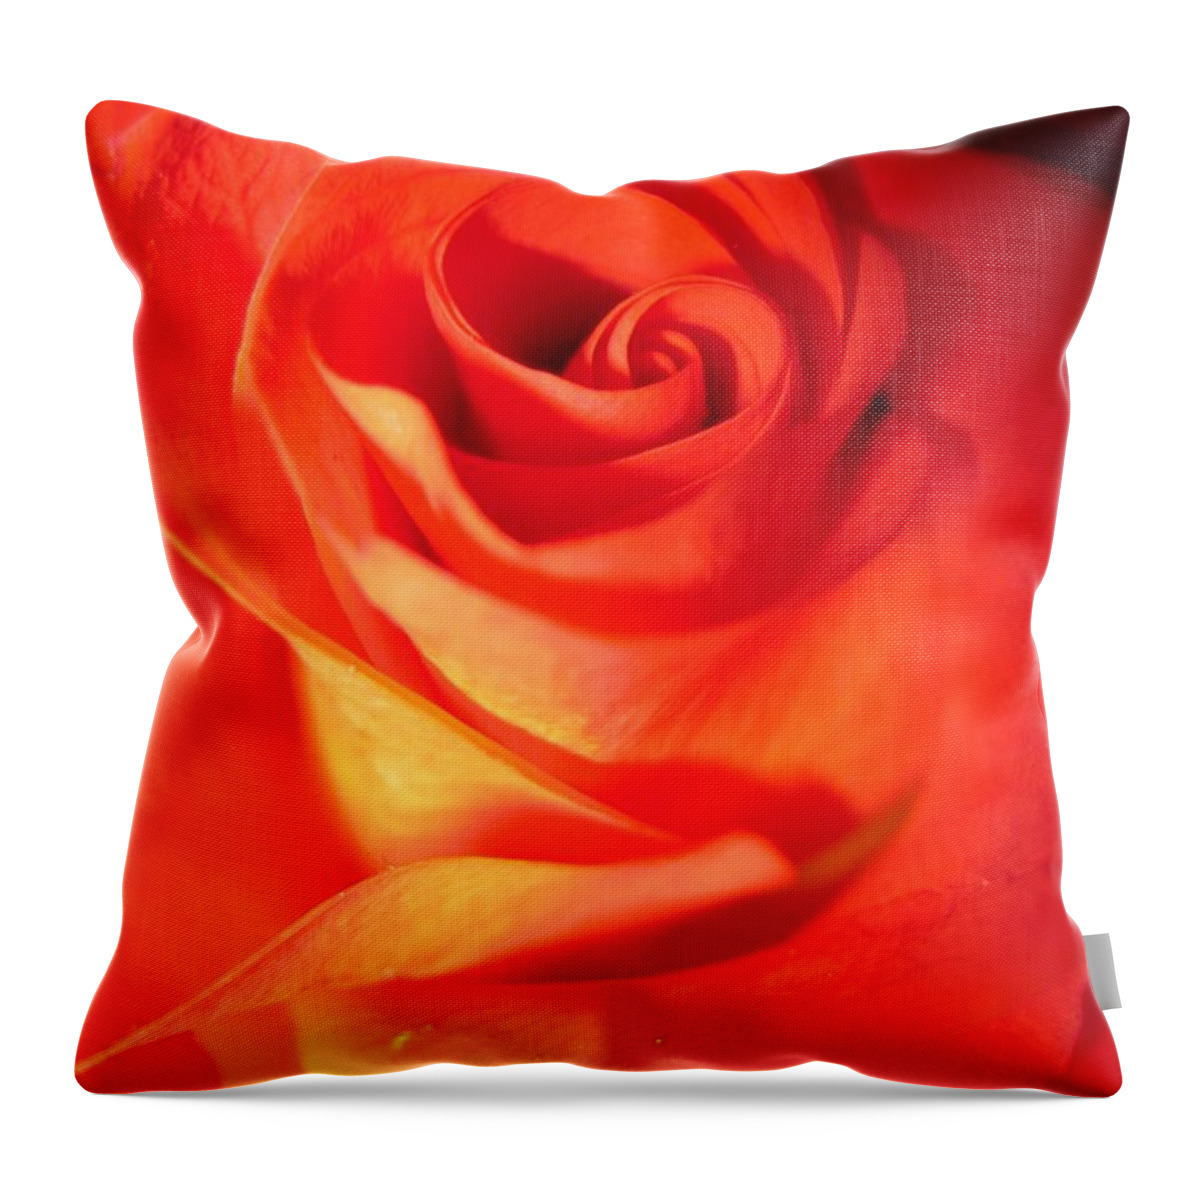 Floral Throw Pillow featuring the photograph Sunkissed Orange Rose 10 by Tara Shalton